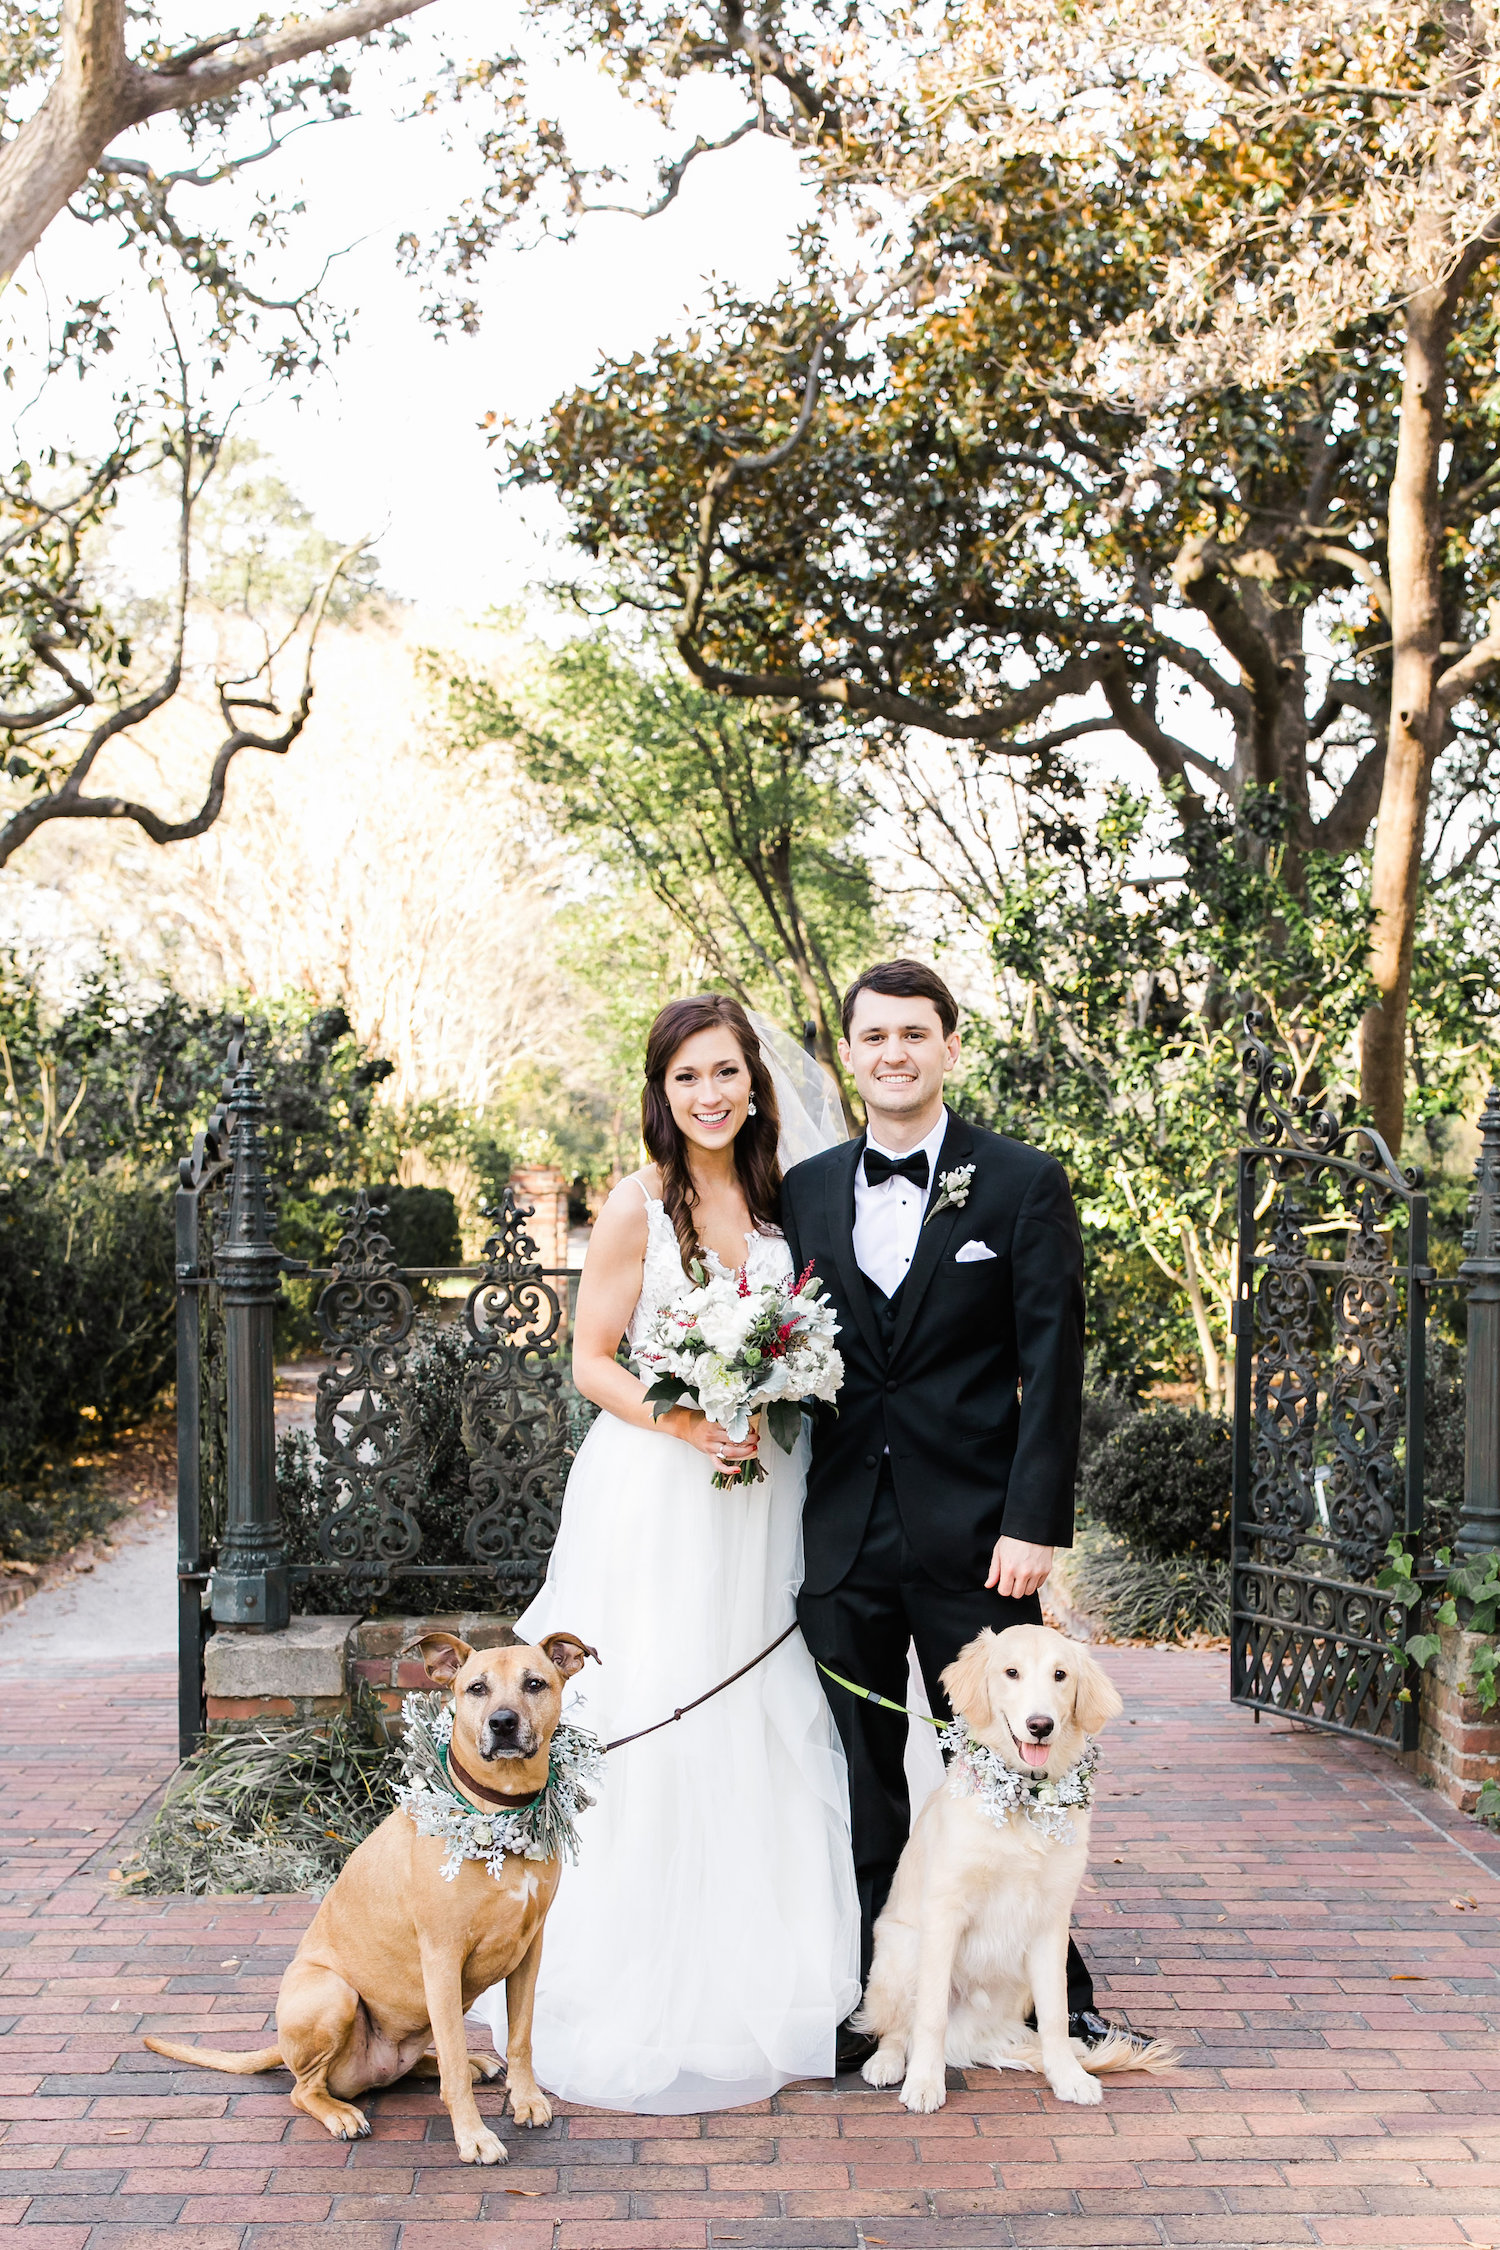 Bride-Groom with dogs